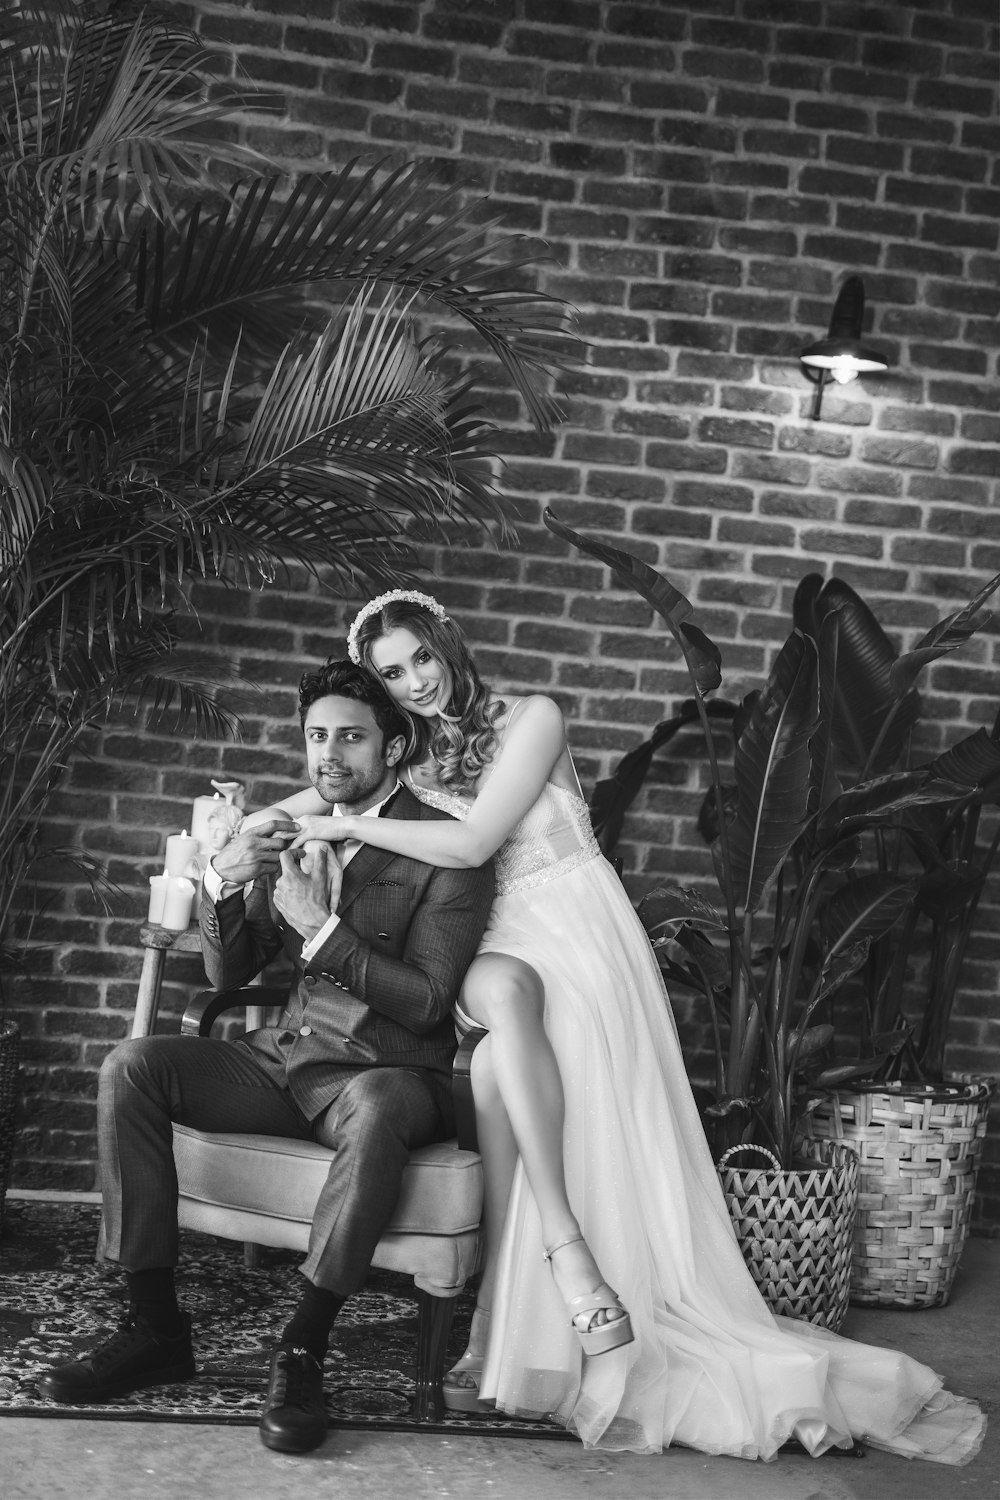 a bride and groom sitting on a bench in front of a brick wall